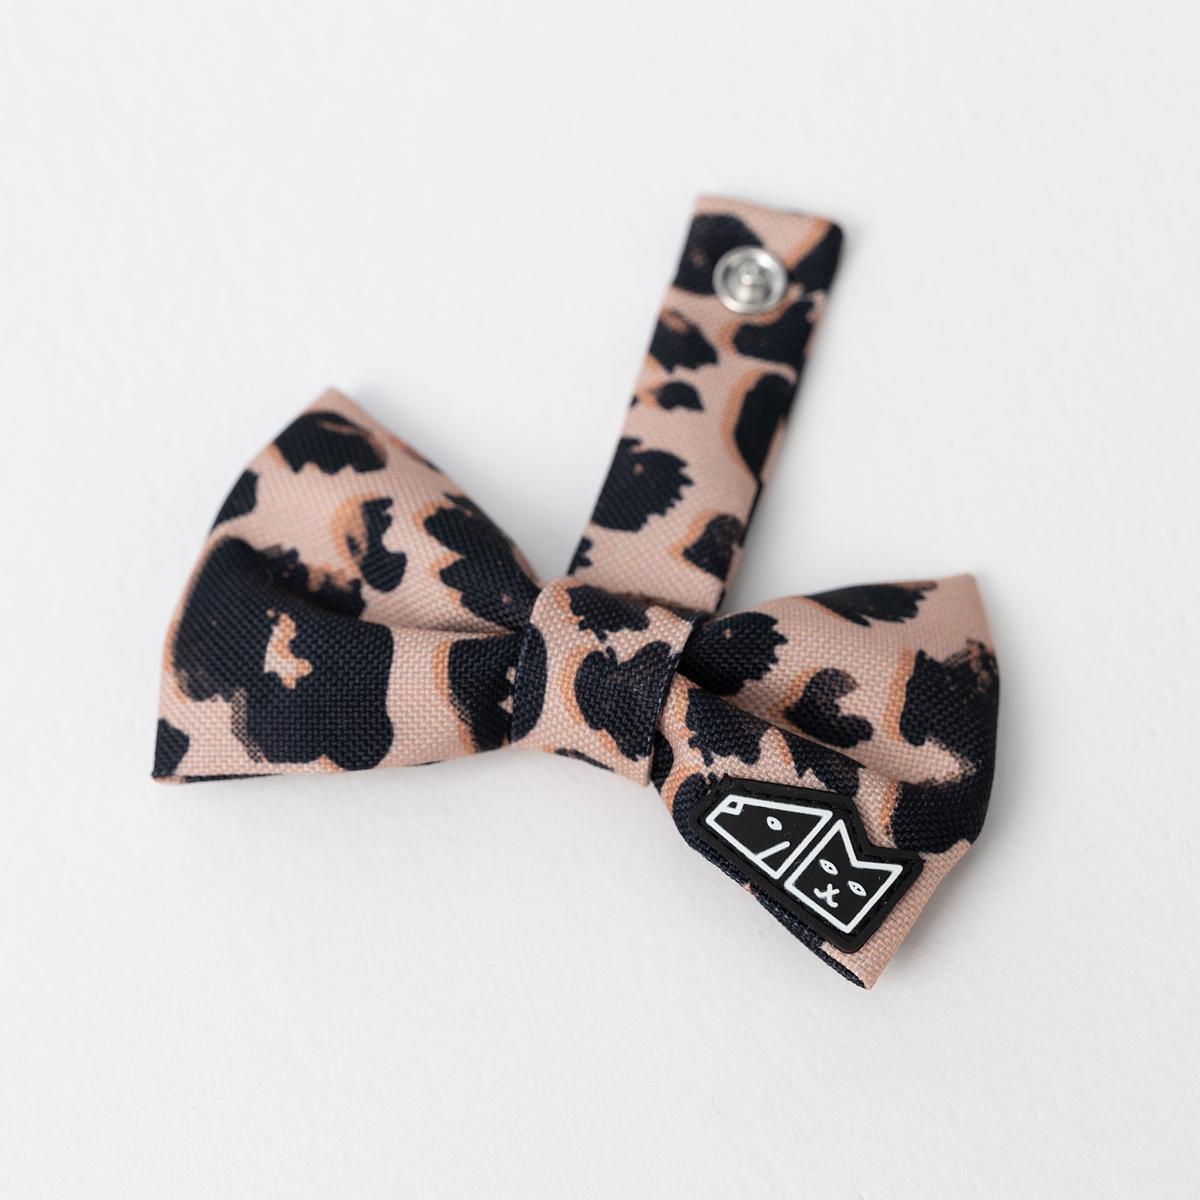 "Respect the wildness" bow tie